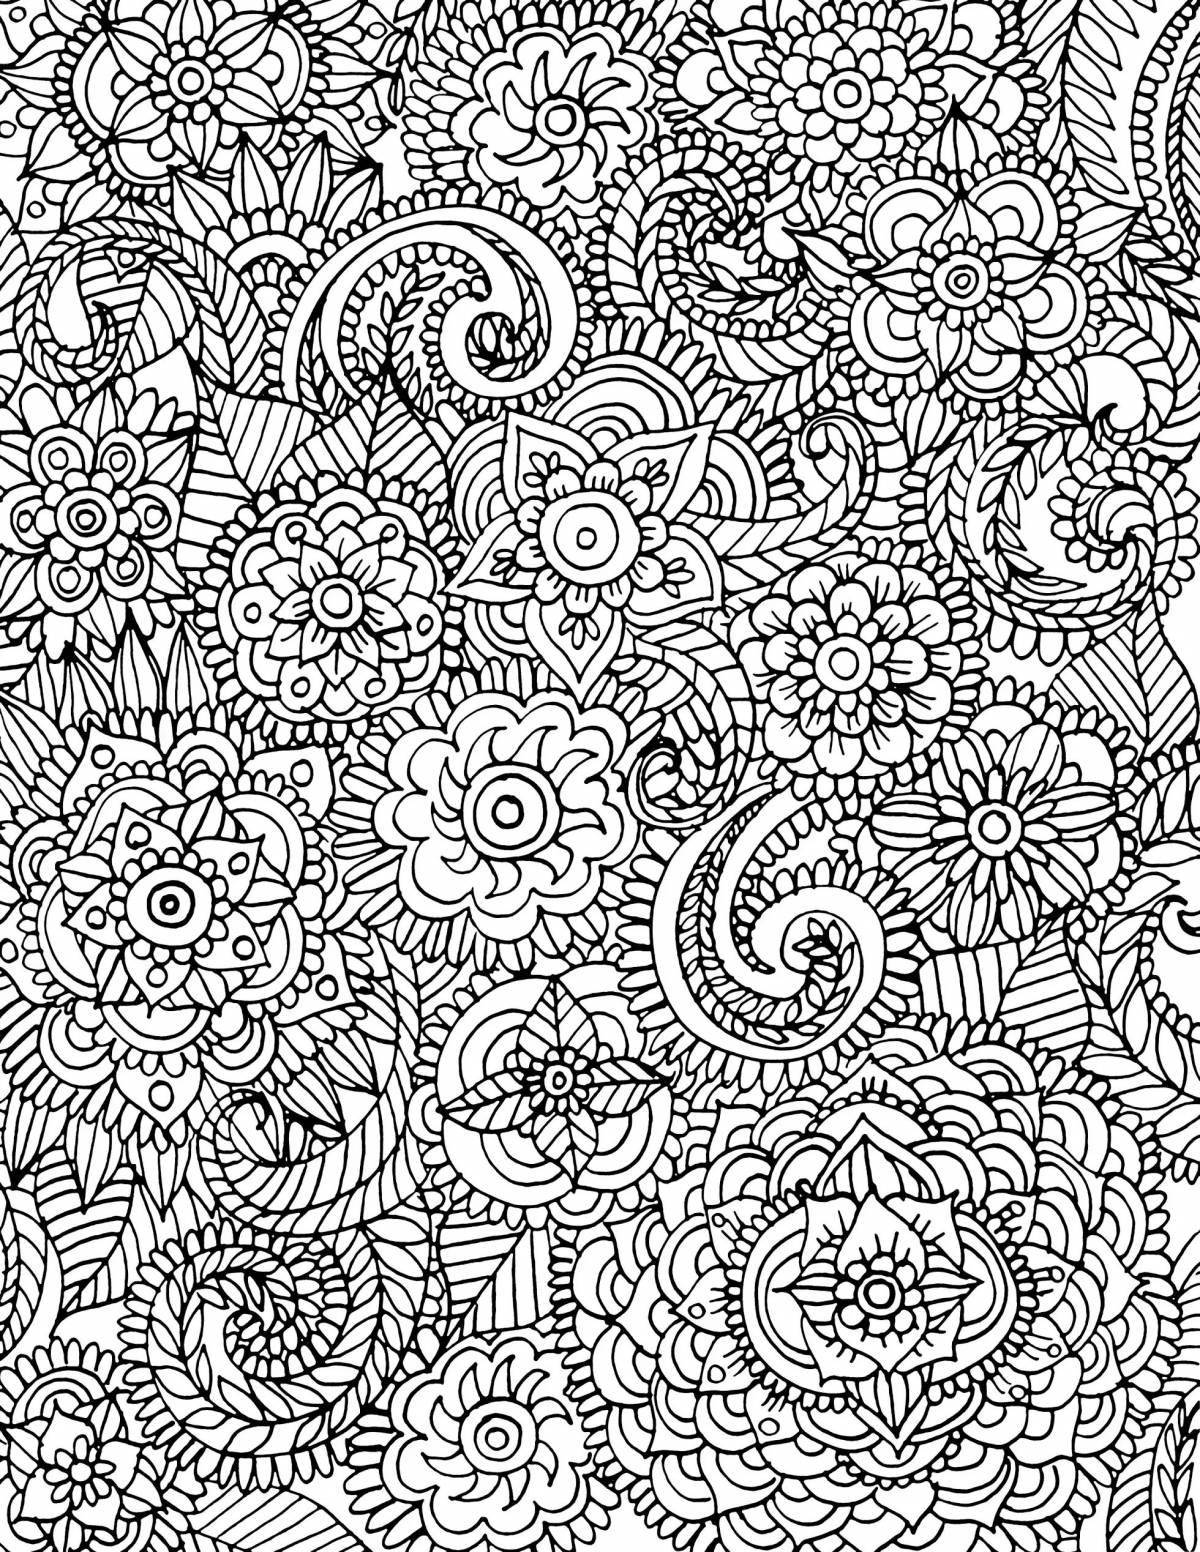 Exquisite coloring pages with intricate patterns for girls